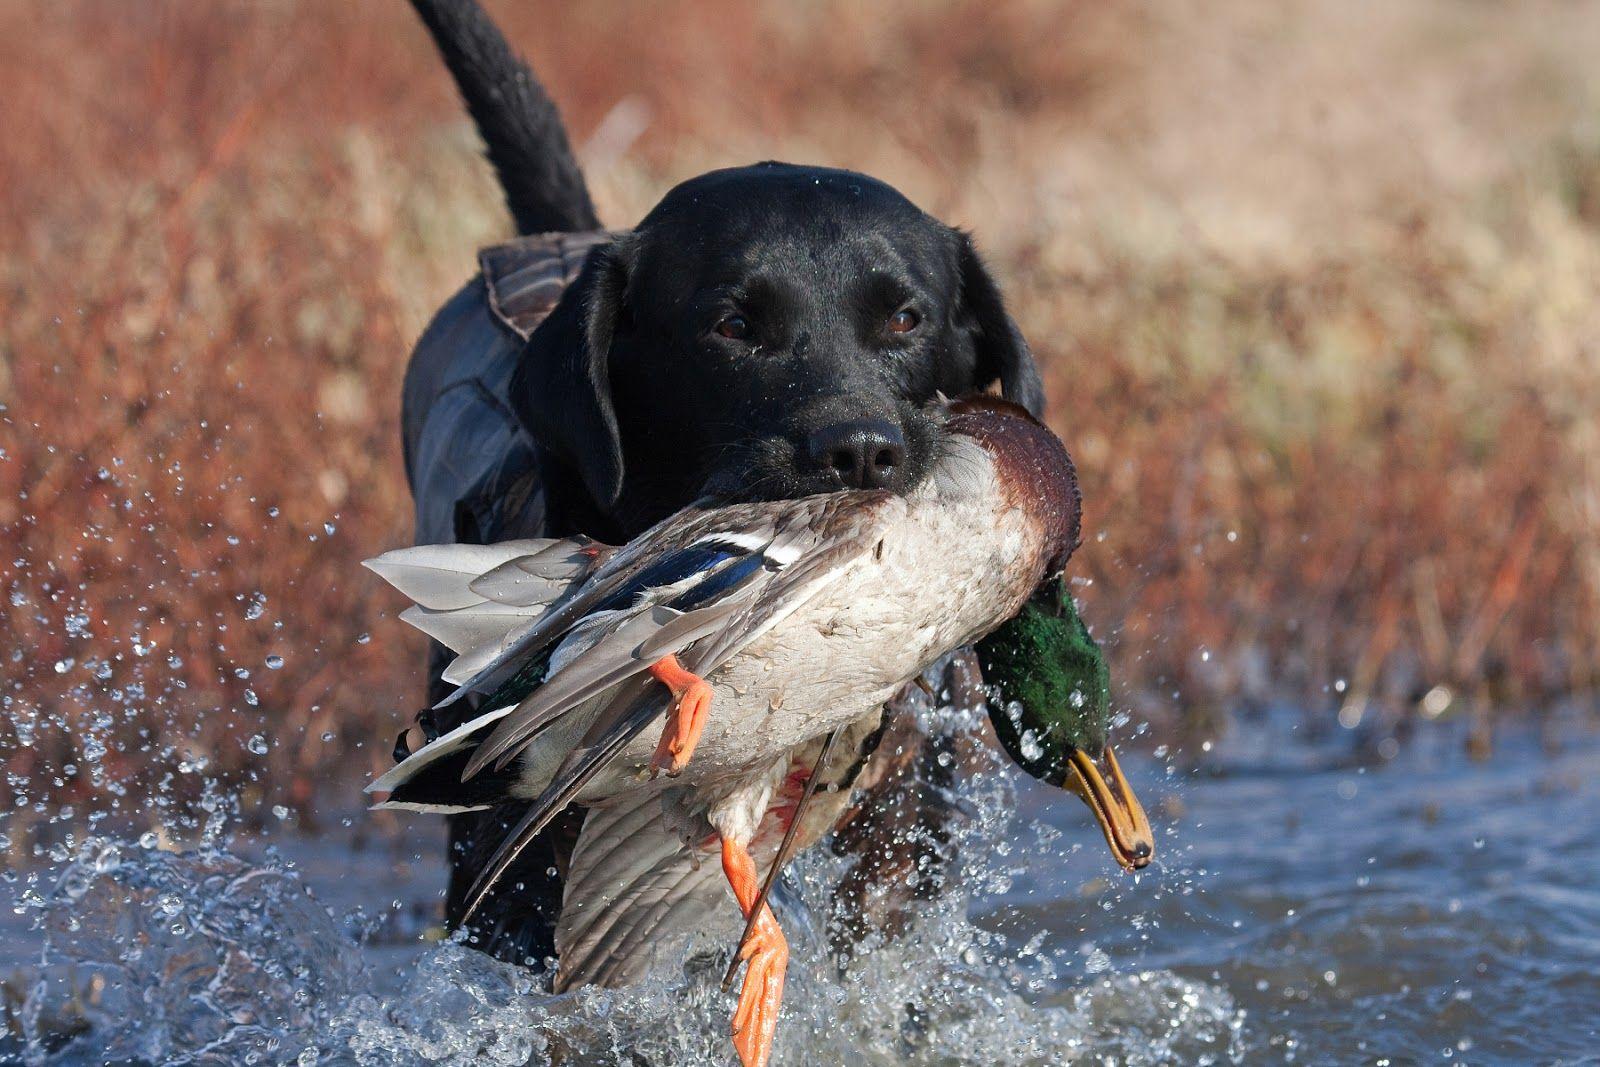 Duck Hunting Wallpapers Dog - The duck hunt dog is a character from the